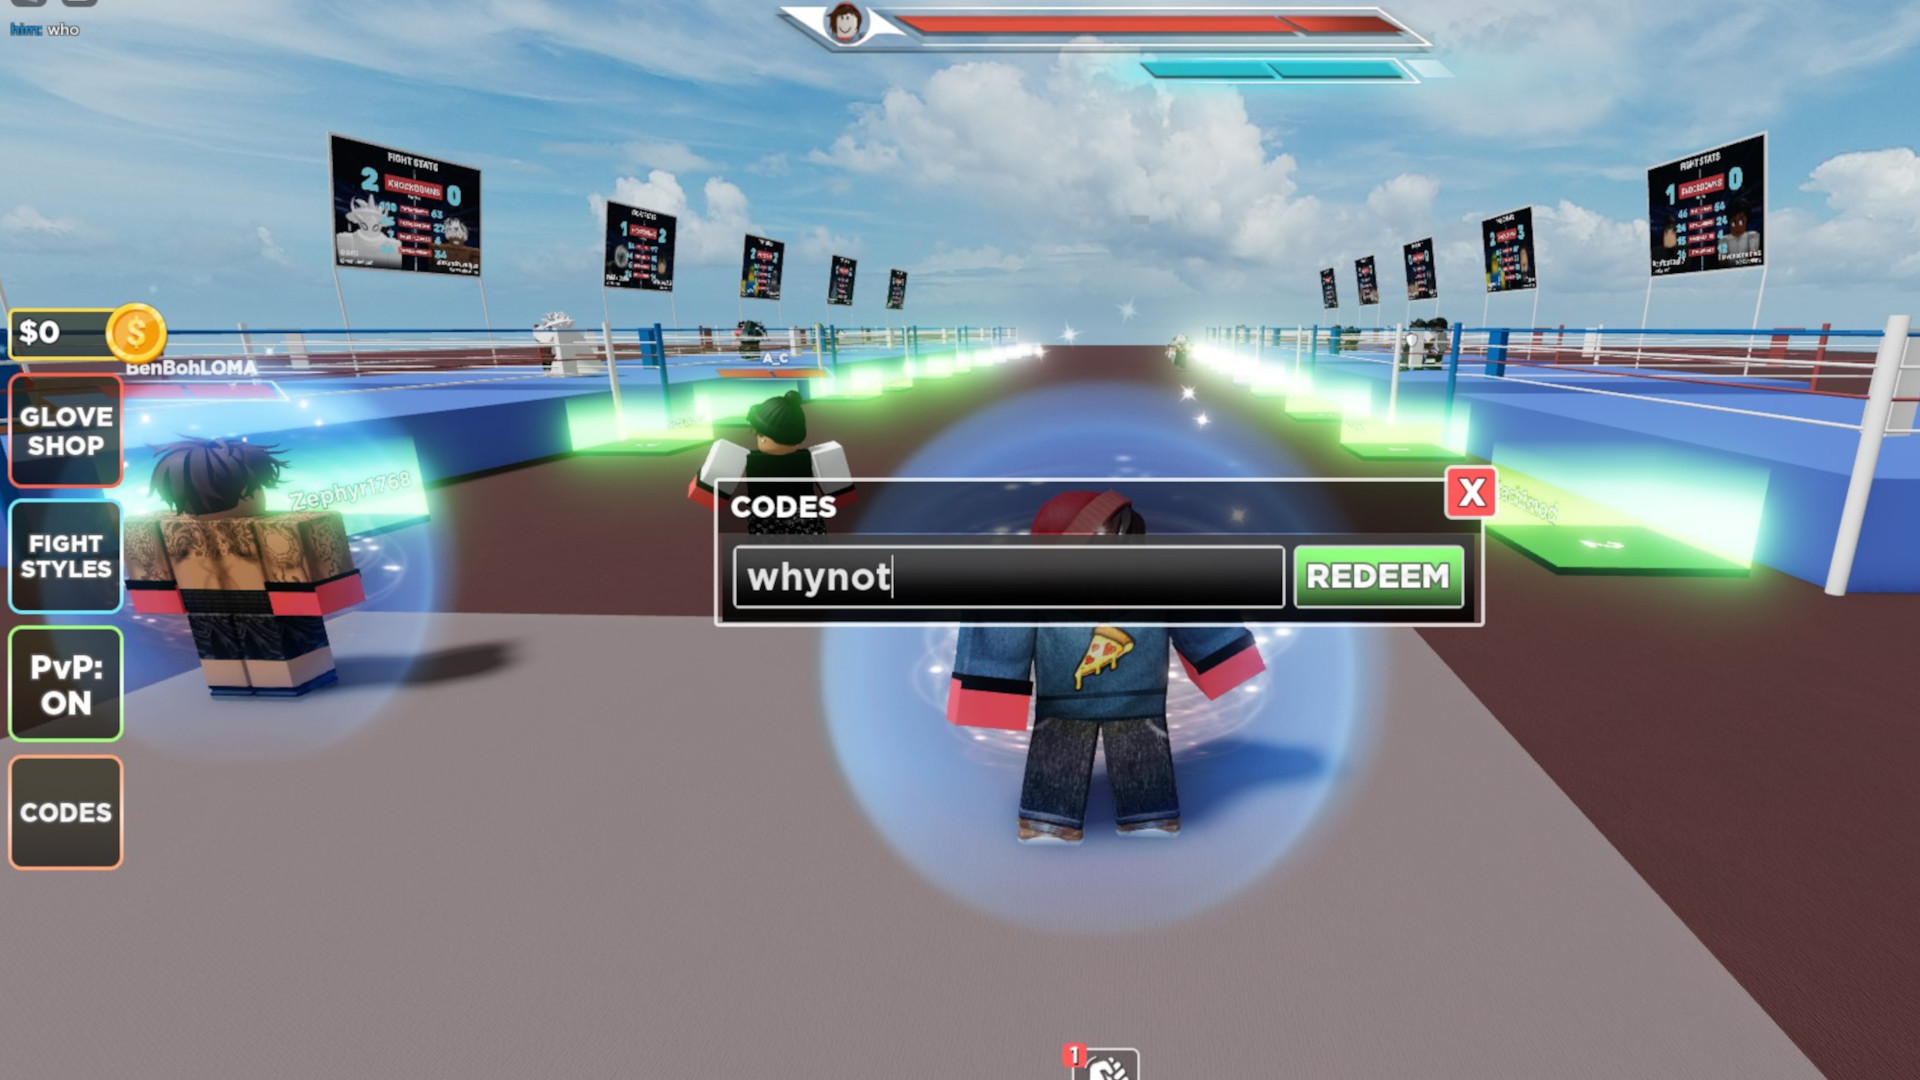 A Roblox character redeeming an Untitled Boxing Games code in-game